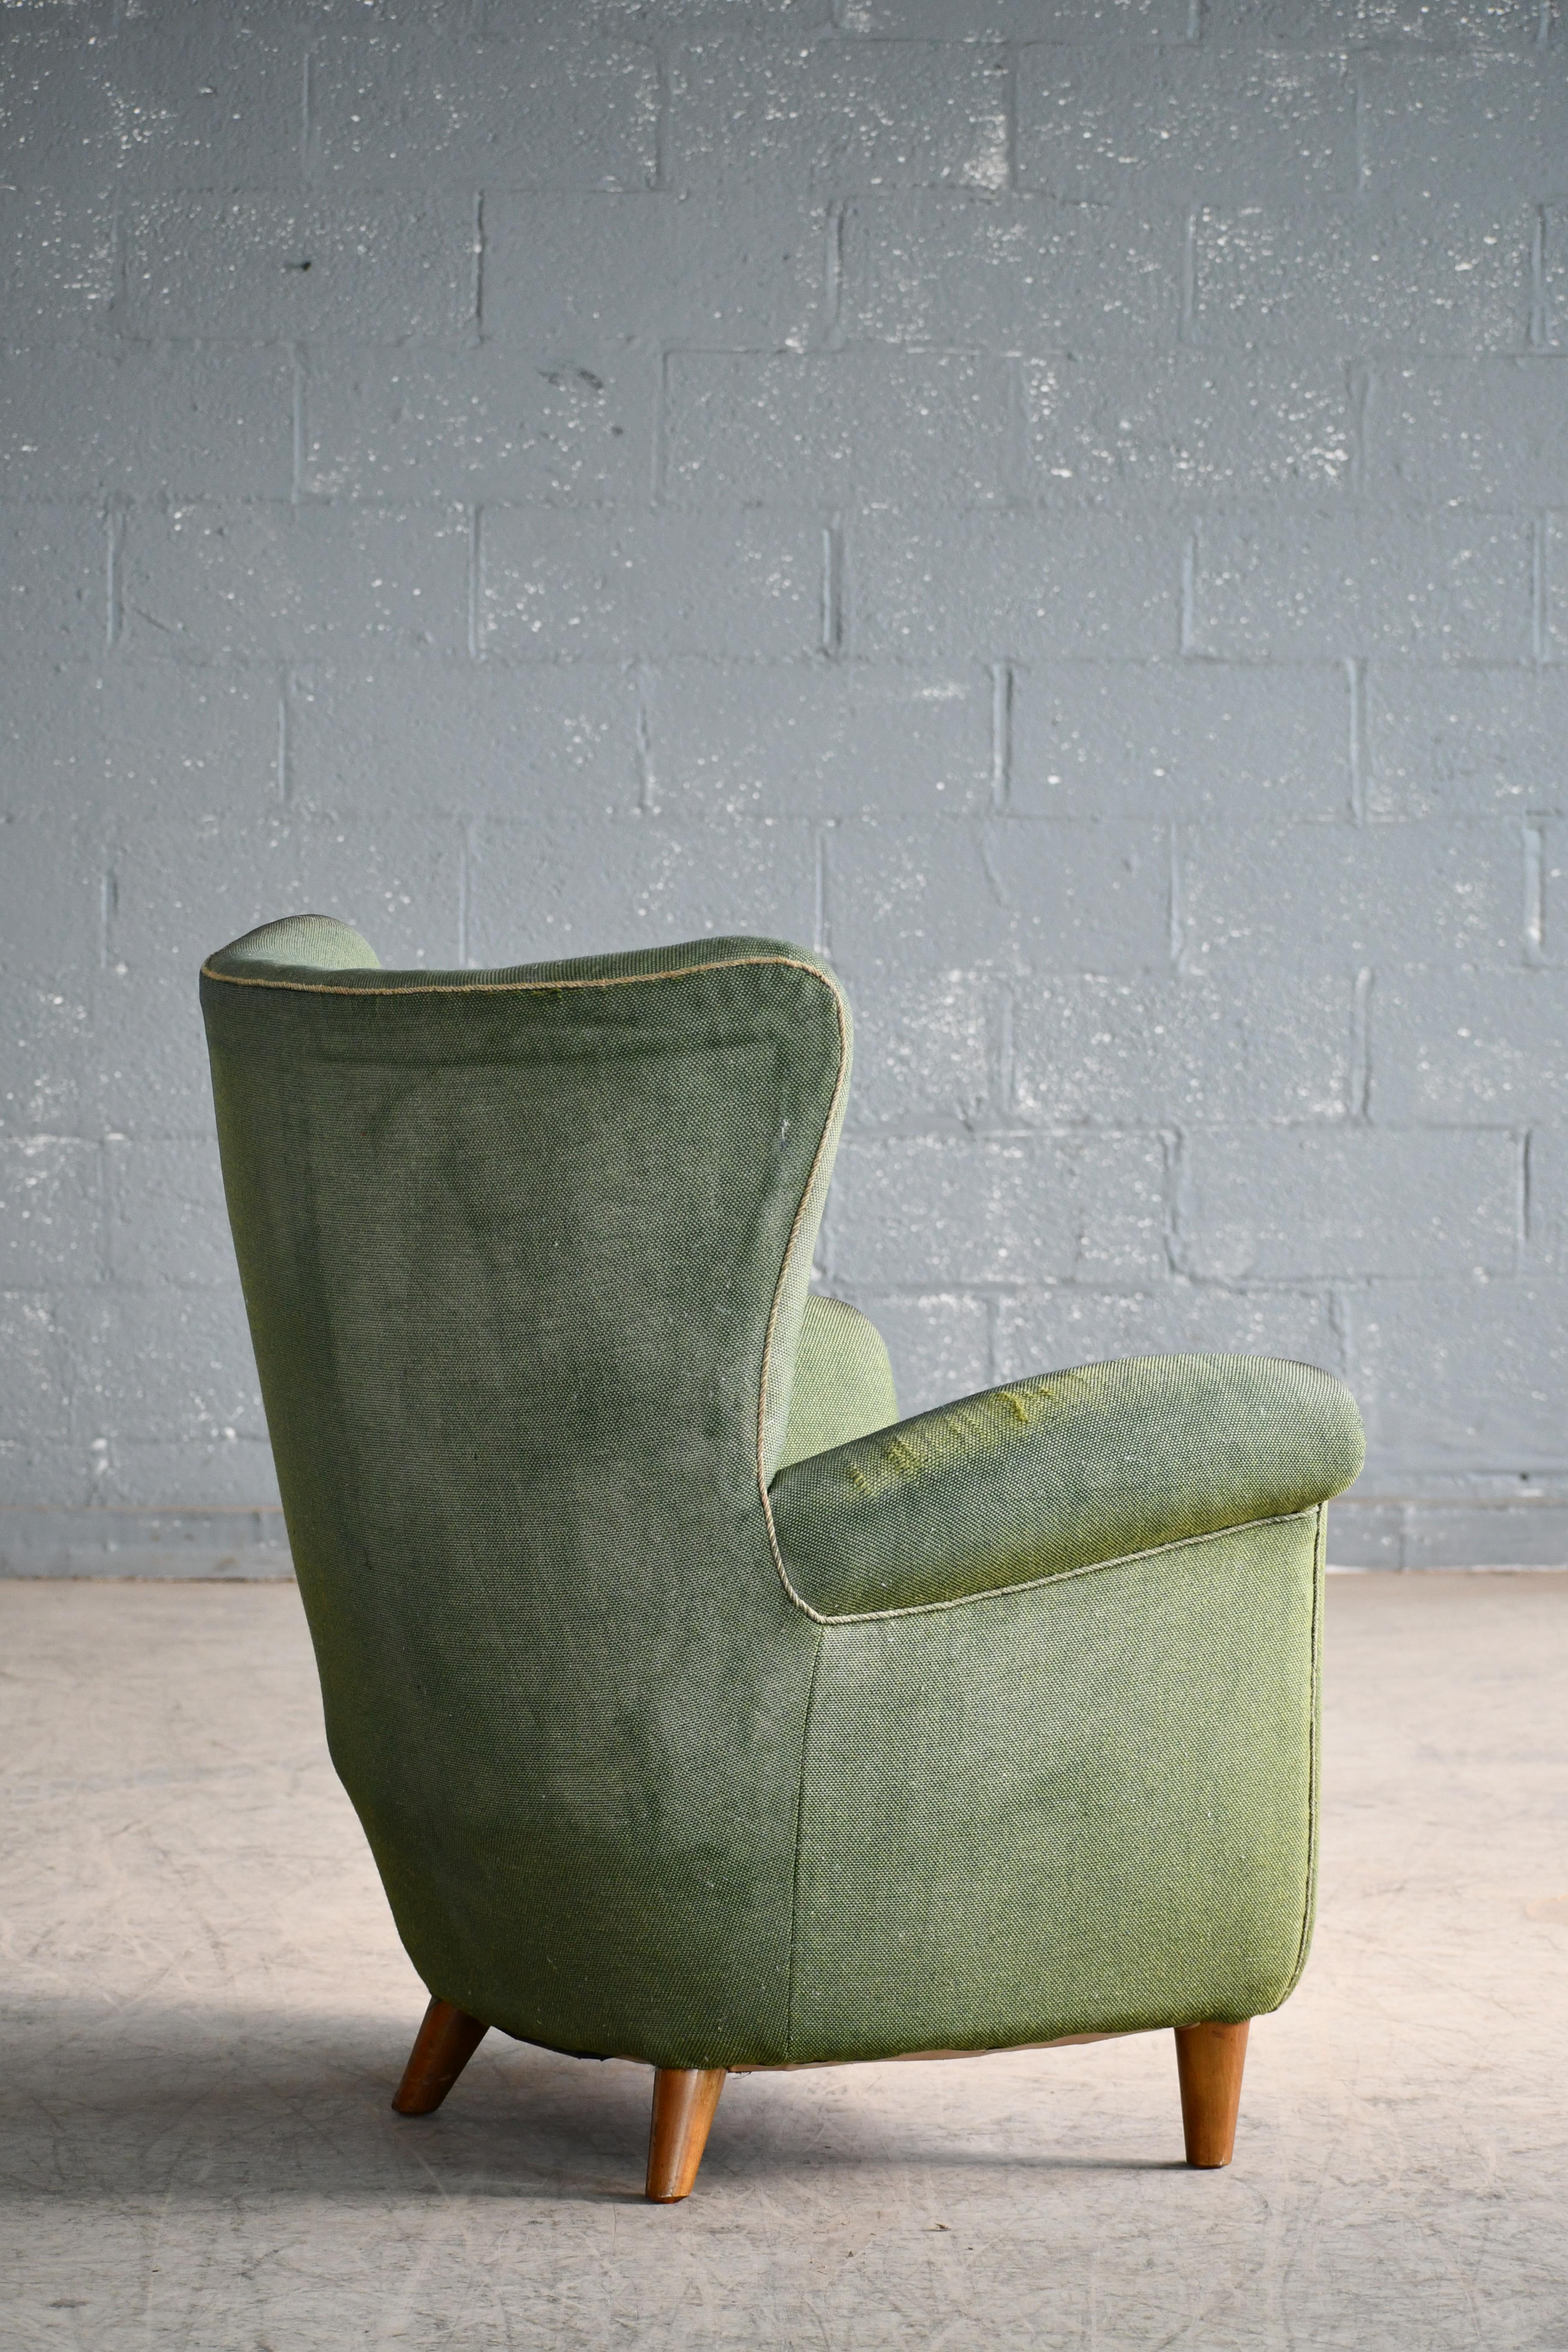 Danish Medium Highback Lounge Chair from the 1940s For Sale 1